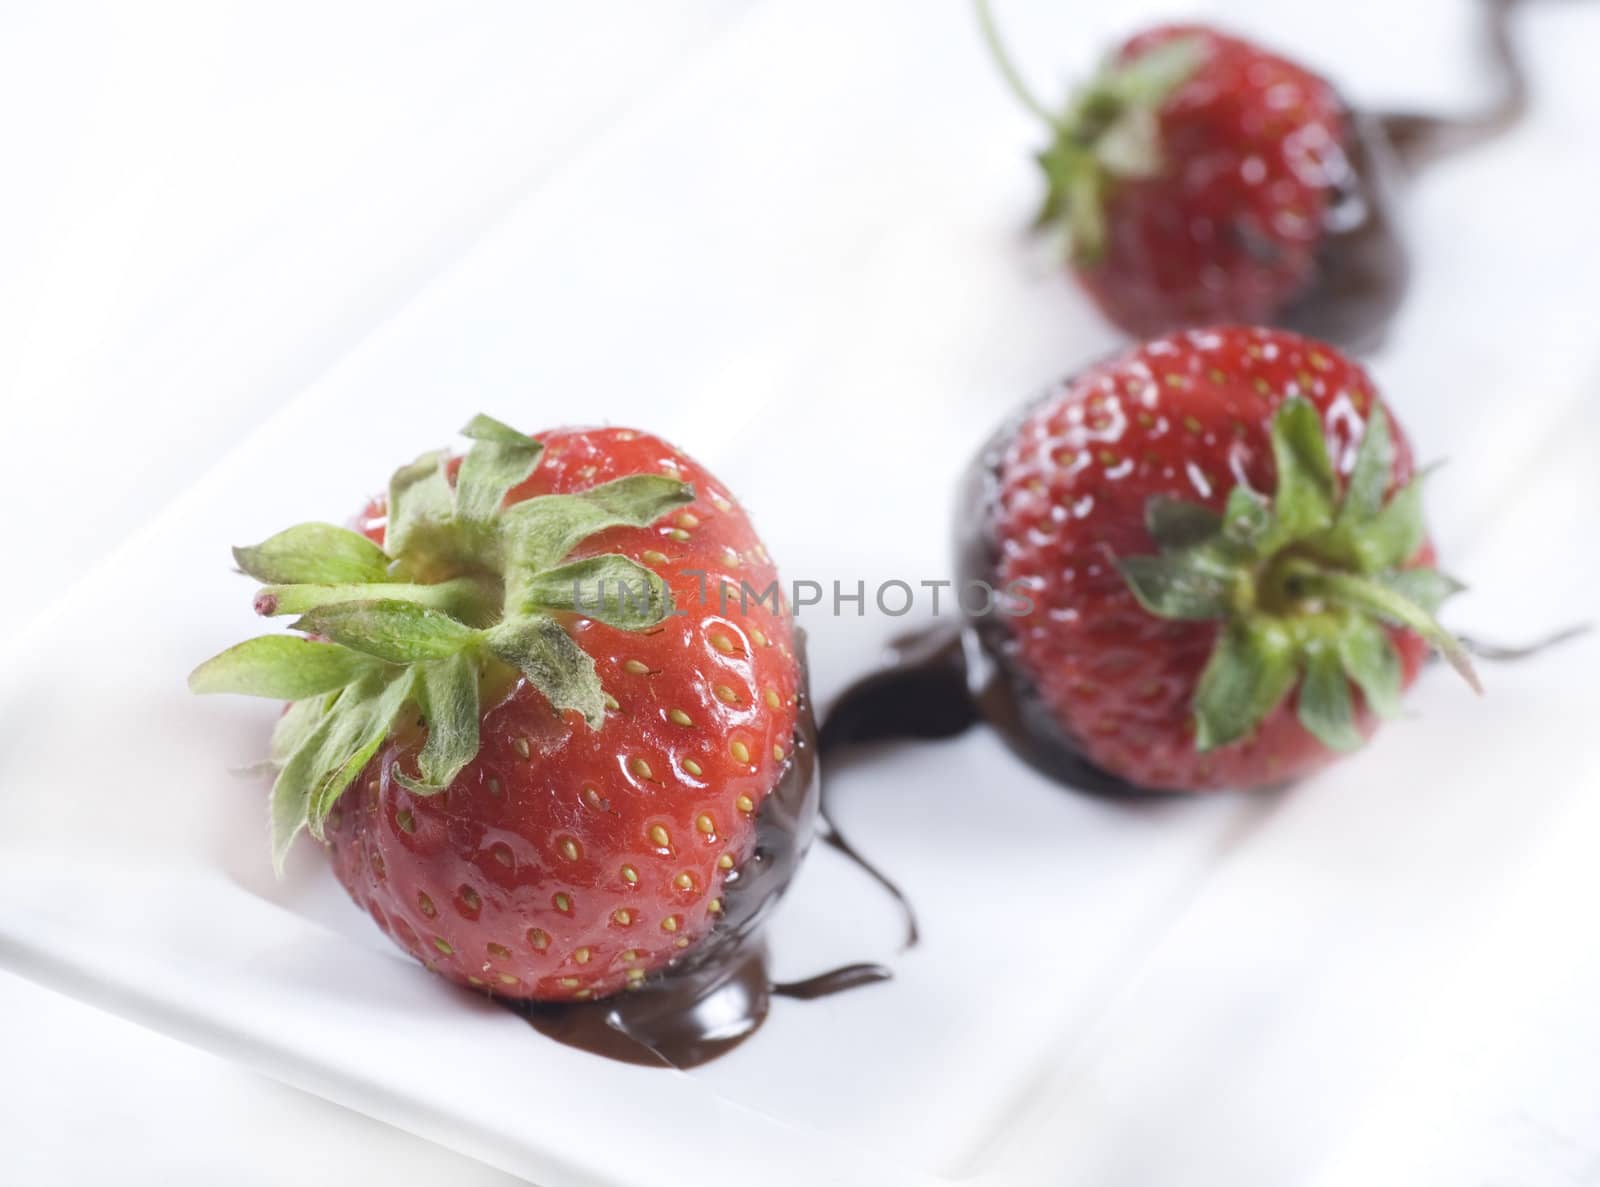 A plate of strawberries and chocolate